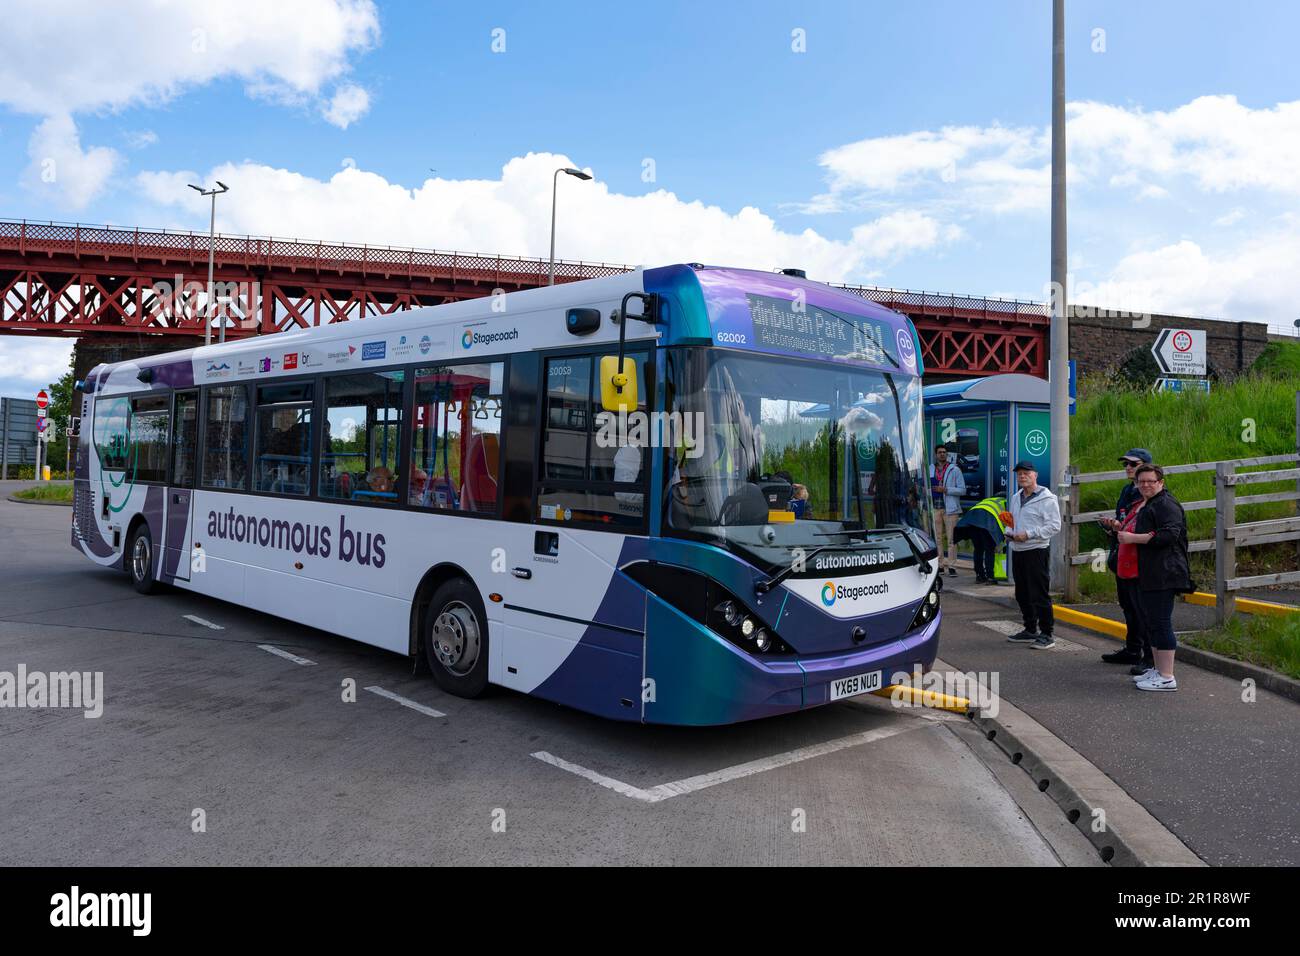 North Queensferry, Scotland, UK. 15 May 2023. Stagecoach autonomous self driving bus starts scheduled service between Ferrytoll Park and Ride at North Queensferry and Edinburgh Gate station in Edinburgh. The bus is the first full sized self driving passenger bus to operate in the UK. Initially the bus will only be autonomous on sections of motorway on the routs with the driver always ready to take control.. Iain Masterton/Alamy Live News Stock Photo